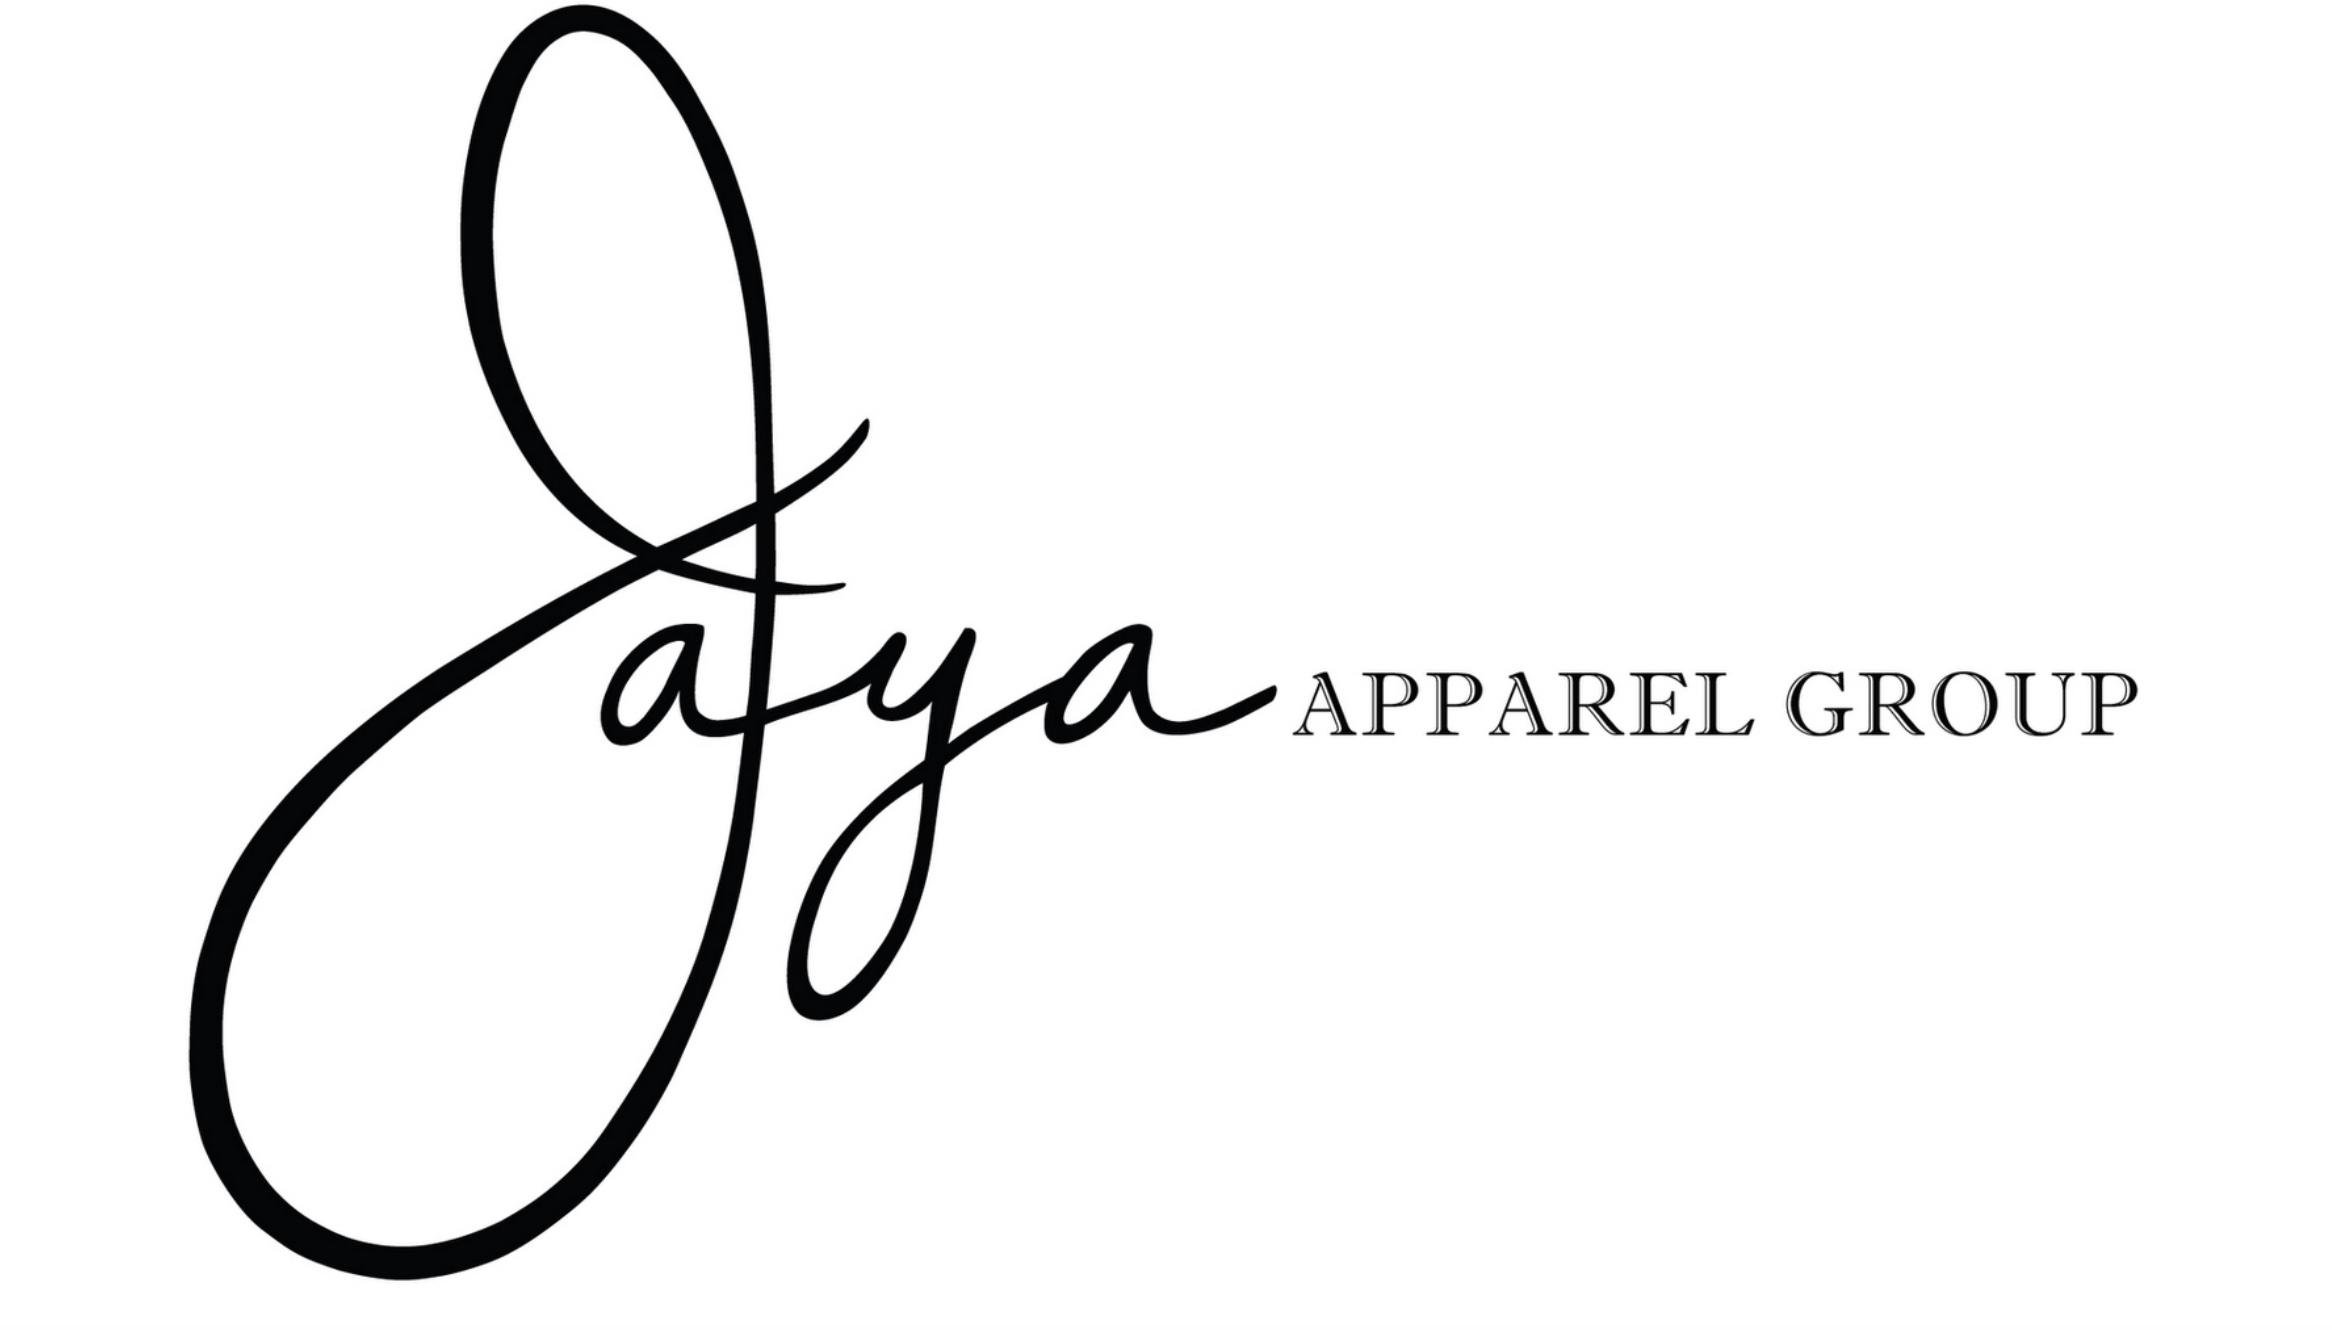 Jaya, a Fashion Apparel Group Founded by Serial Entrepreneurs, Secures Private Equity Funding